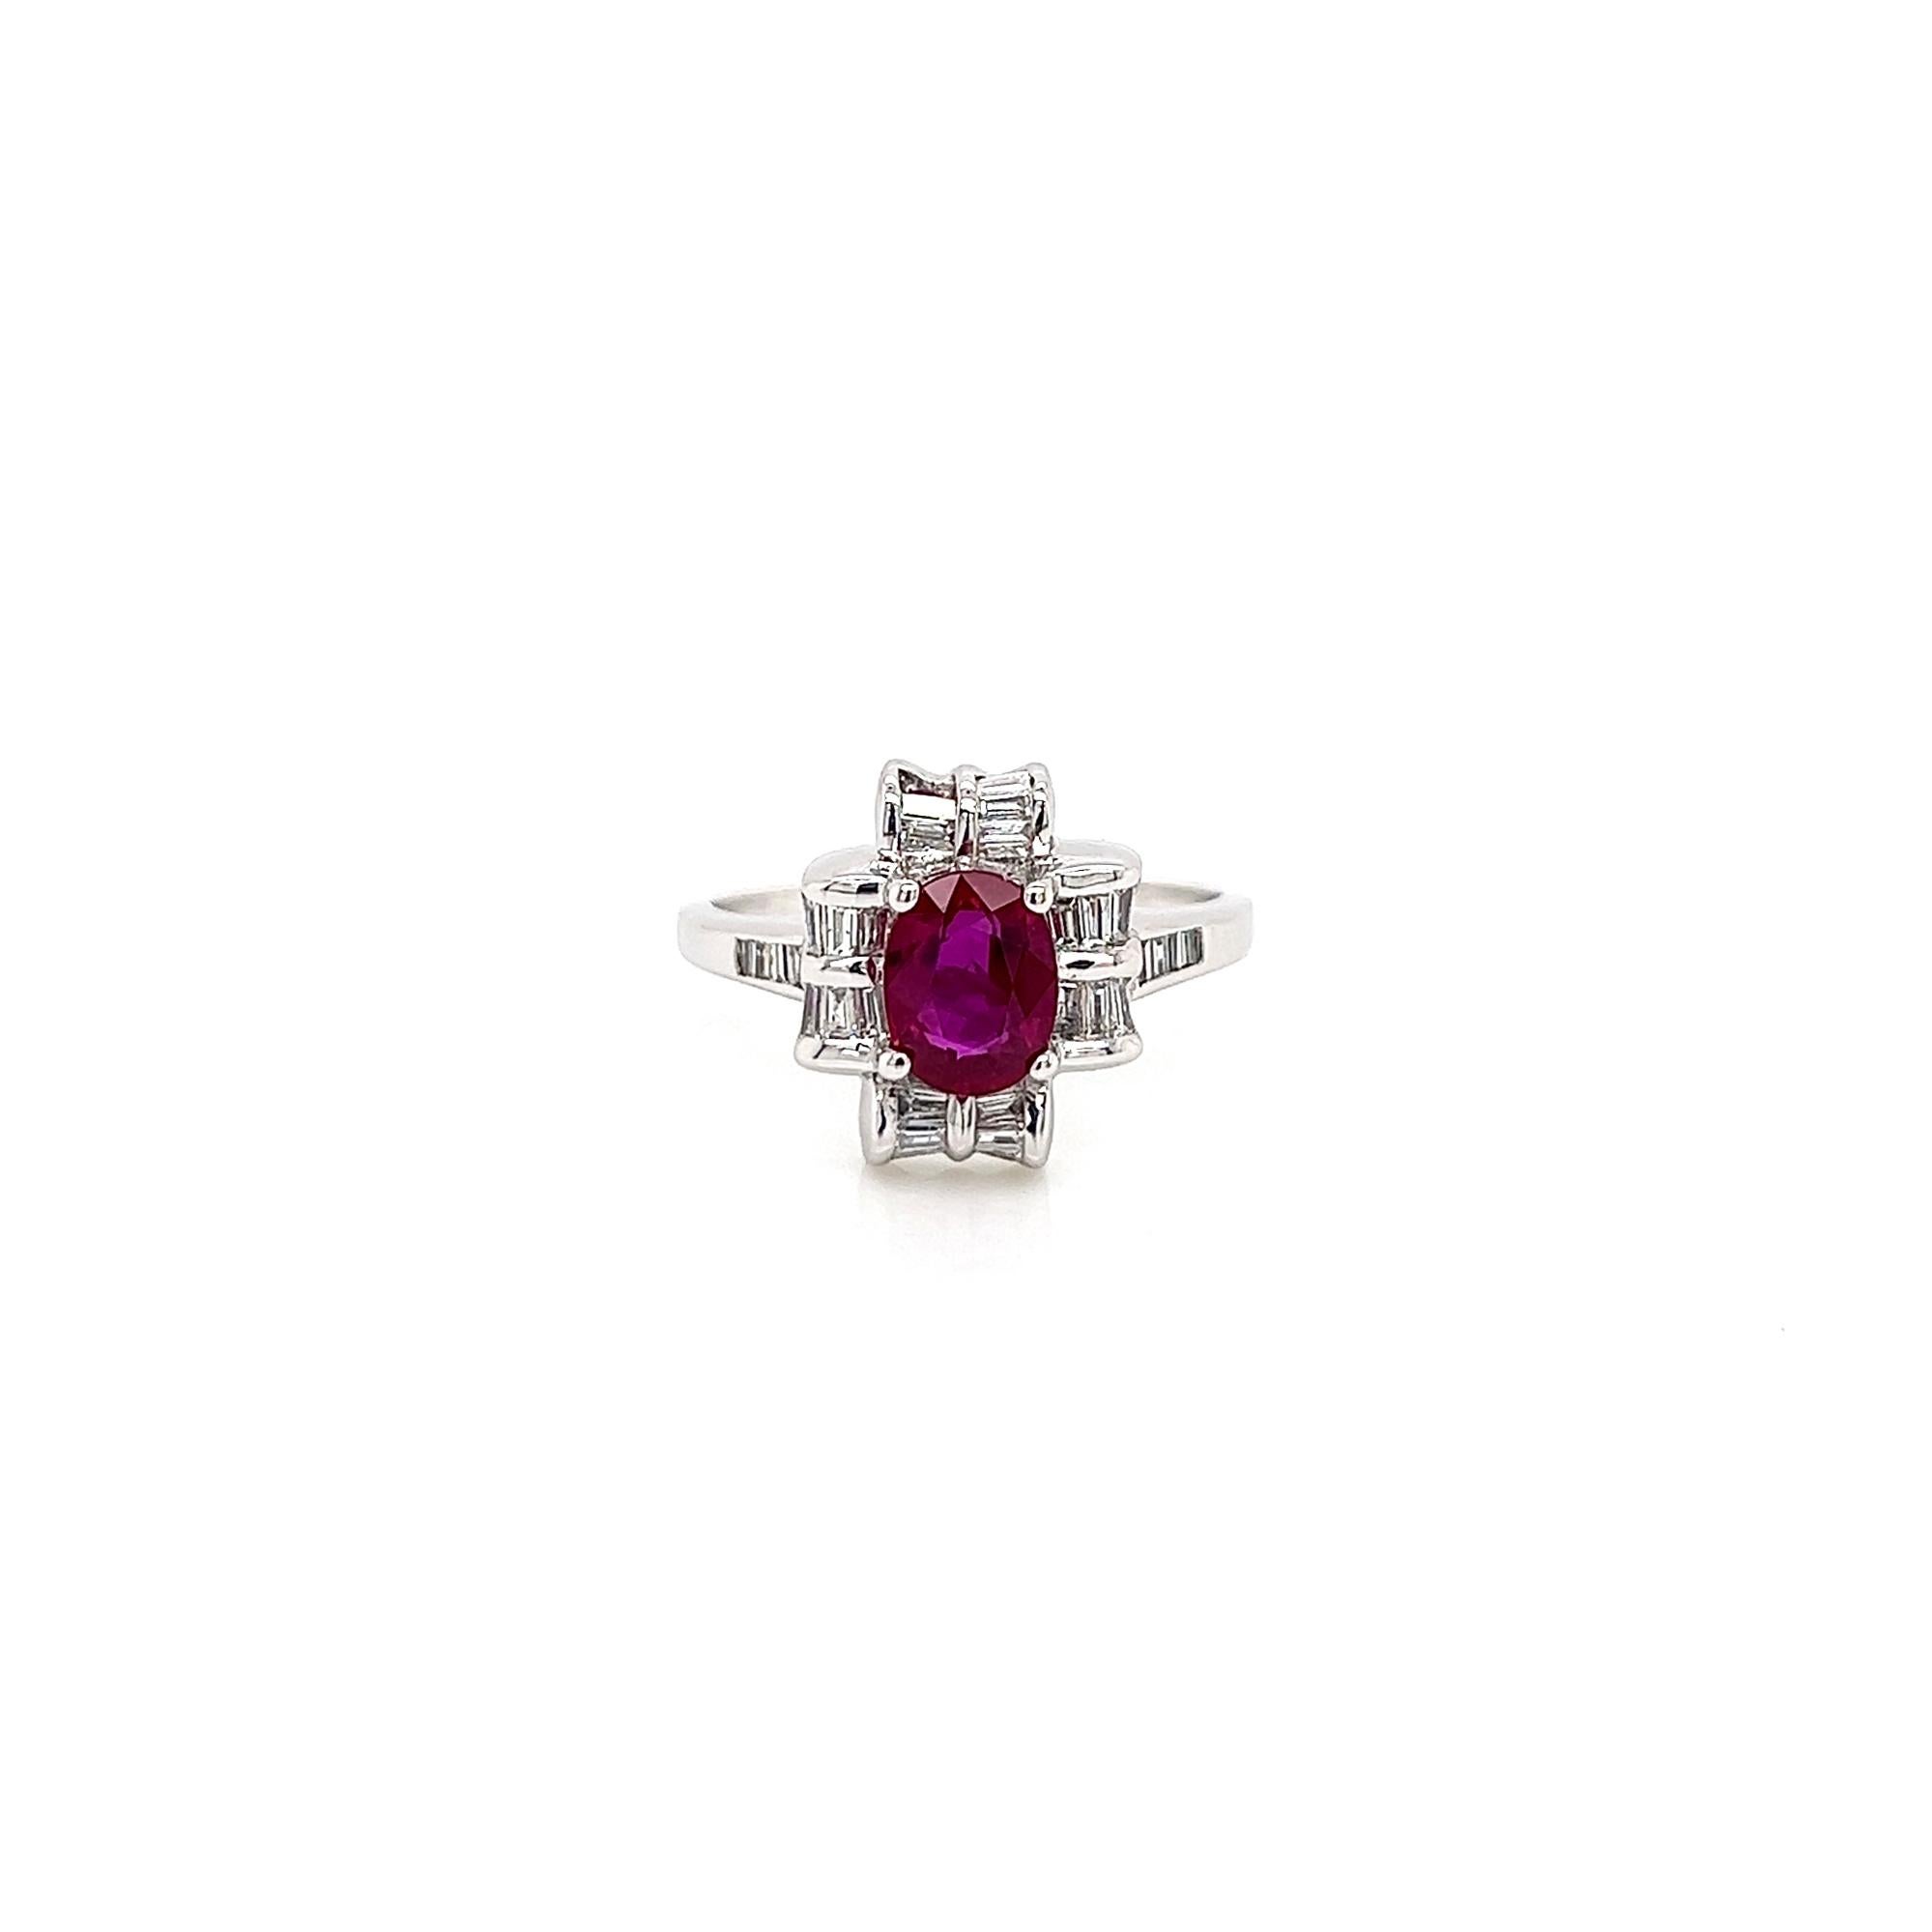 1.0Carat Ruby and Diamond Ladies Vintage Ring

-Metal Type: 18K White Gold
-1.0Carat Oval Cut Ruby
-0.52Carat Baguette Side Natural Diamonds
-Size 6.75

Made in New York City